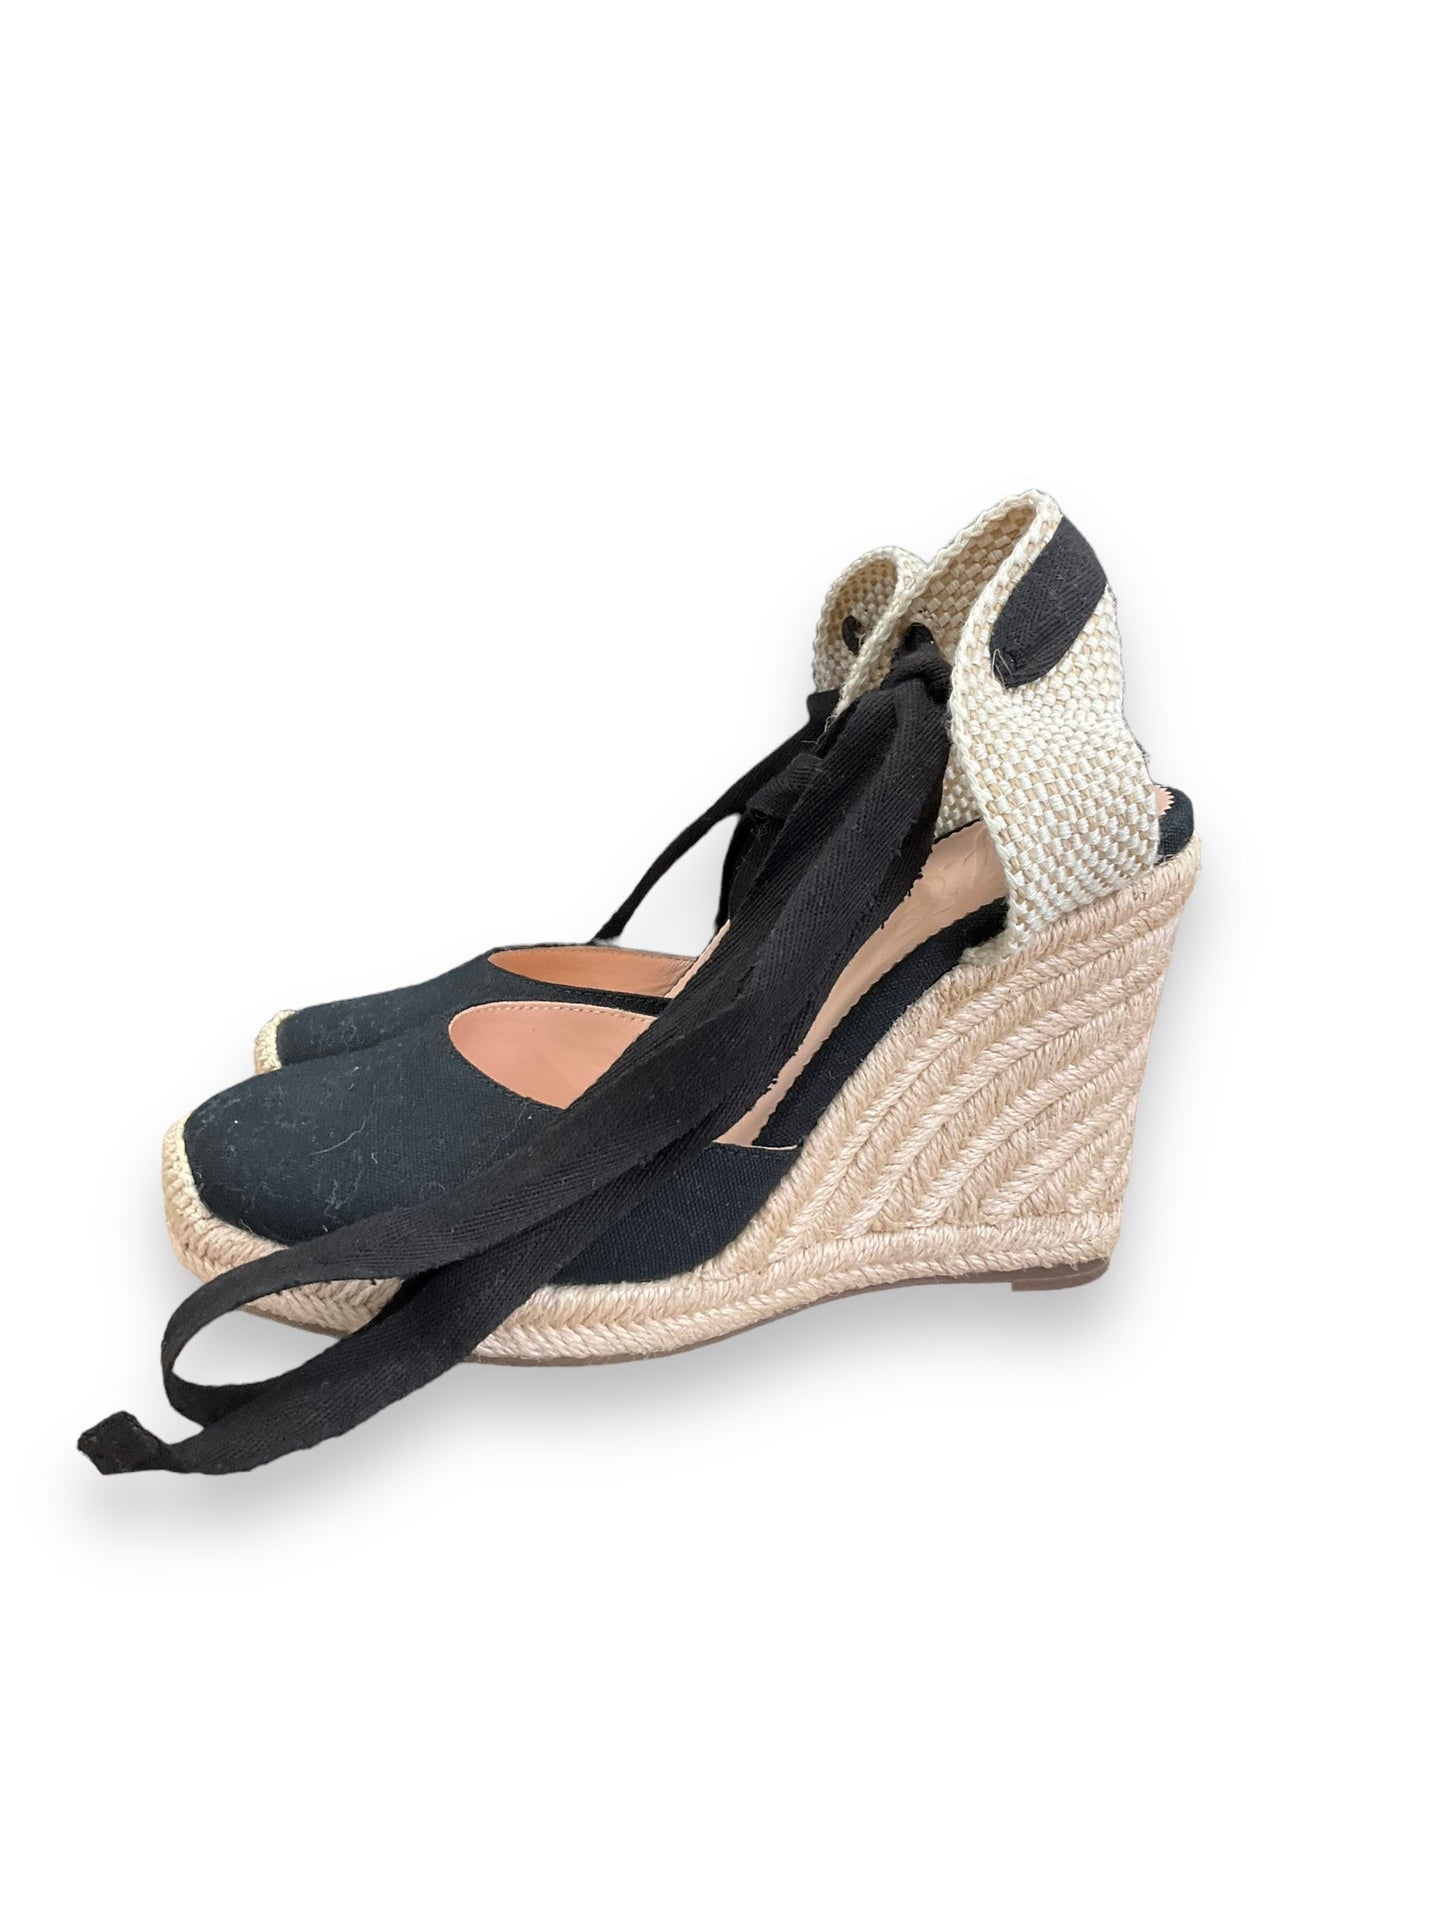 Shoes Heels Espadrille Wedge By J Crew  Size: 6.5